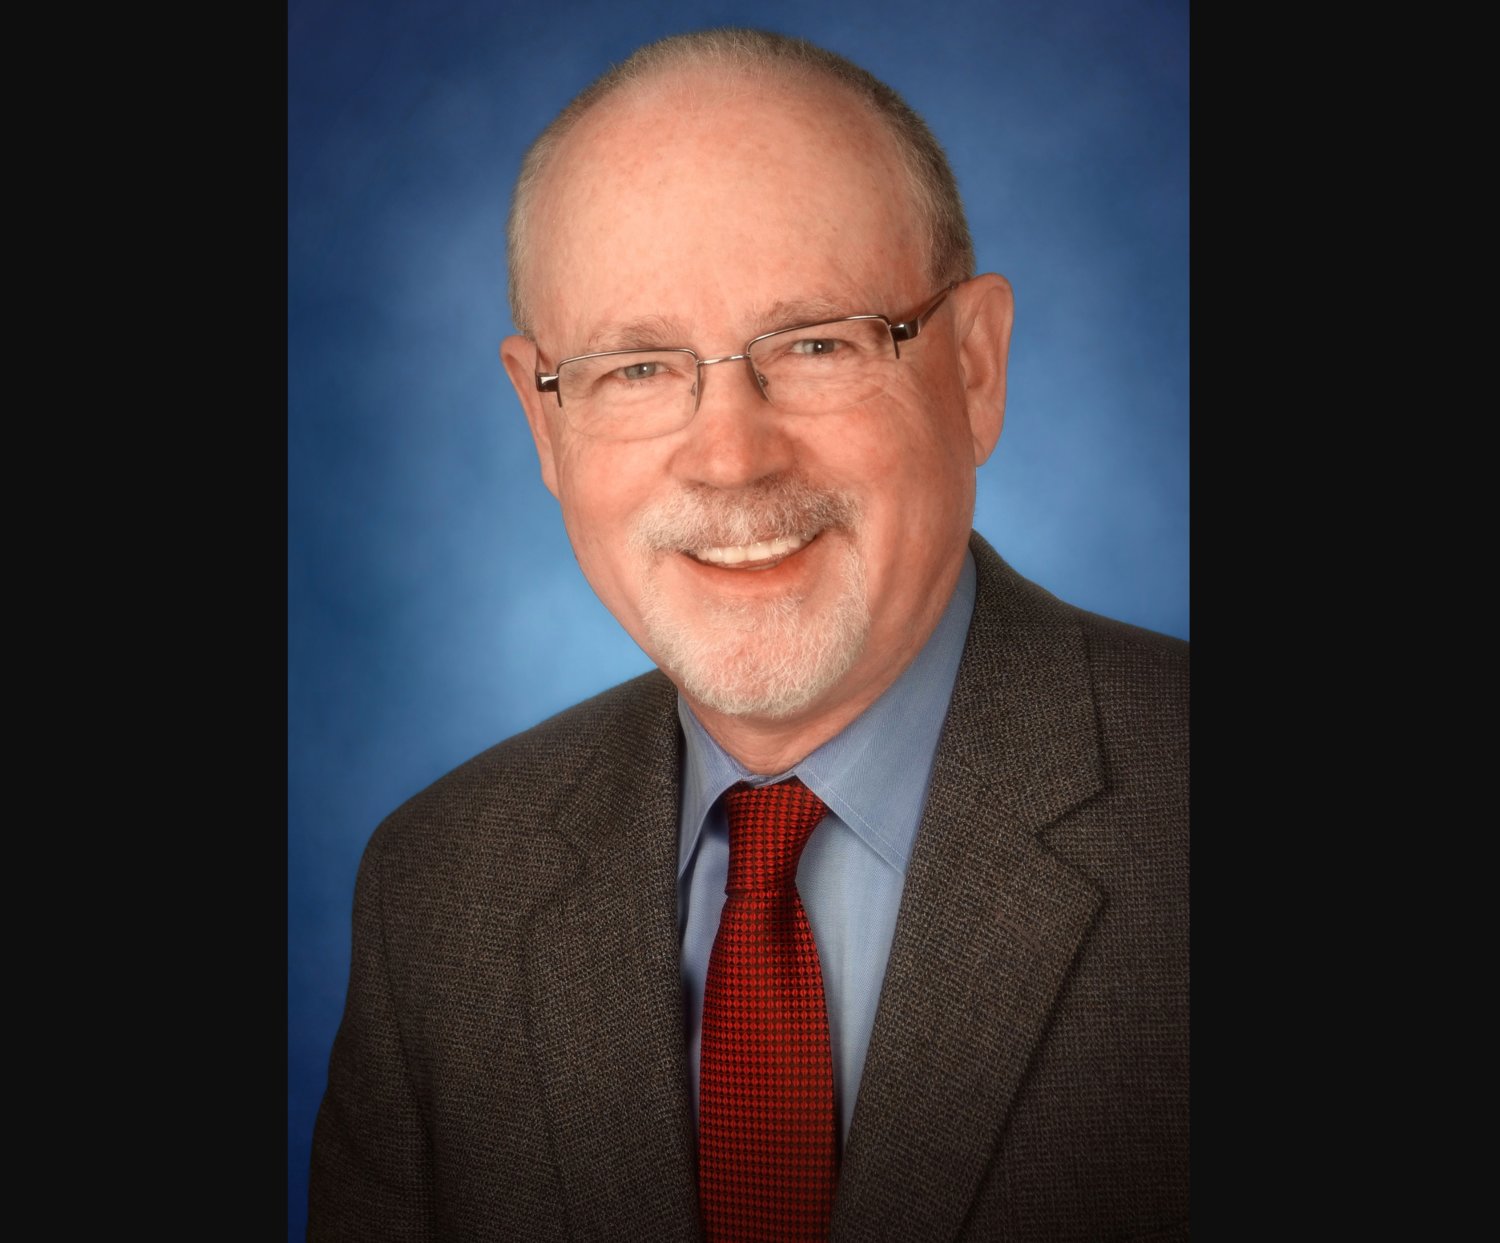 Chehalis optometrist Dr. David Stanfield, from the Pacific Cataract and Laser Institute (PCLI), has received the 2022 “Lifetime Achievement Award” from the Great Western Council of Optometry.